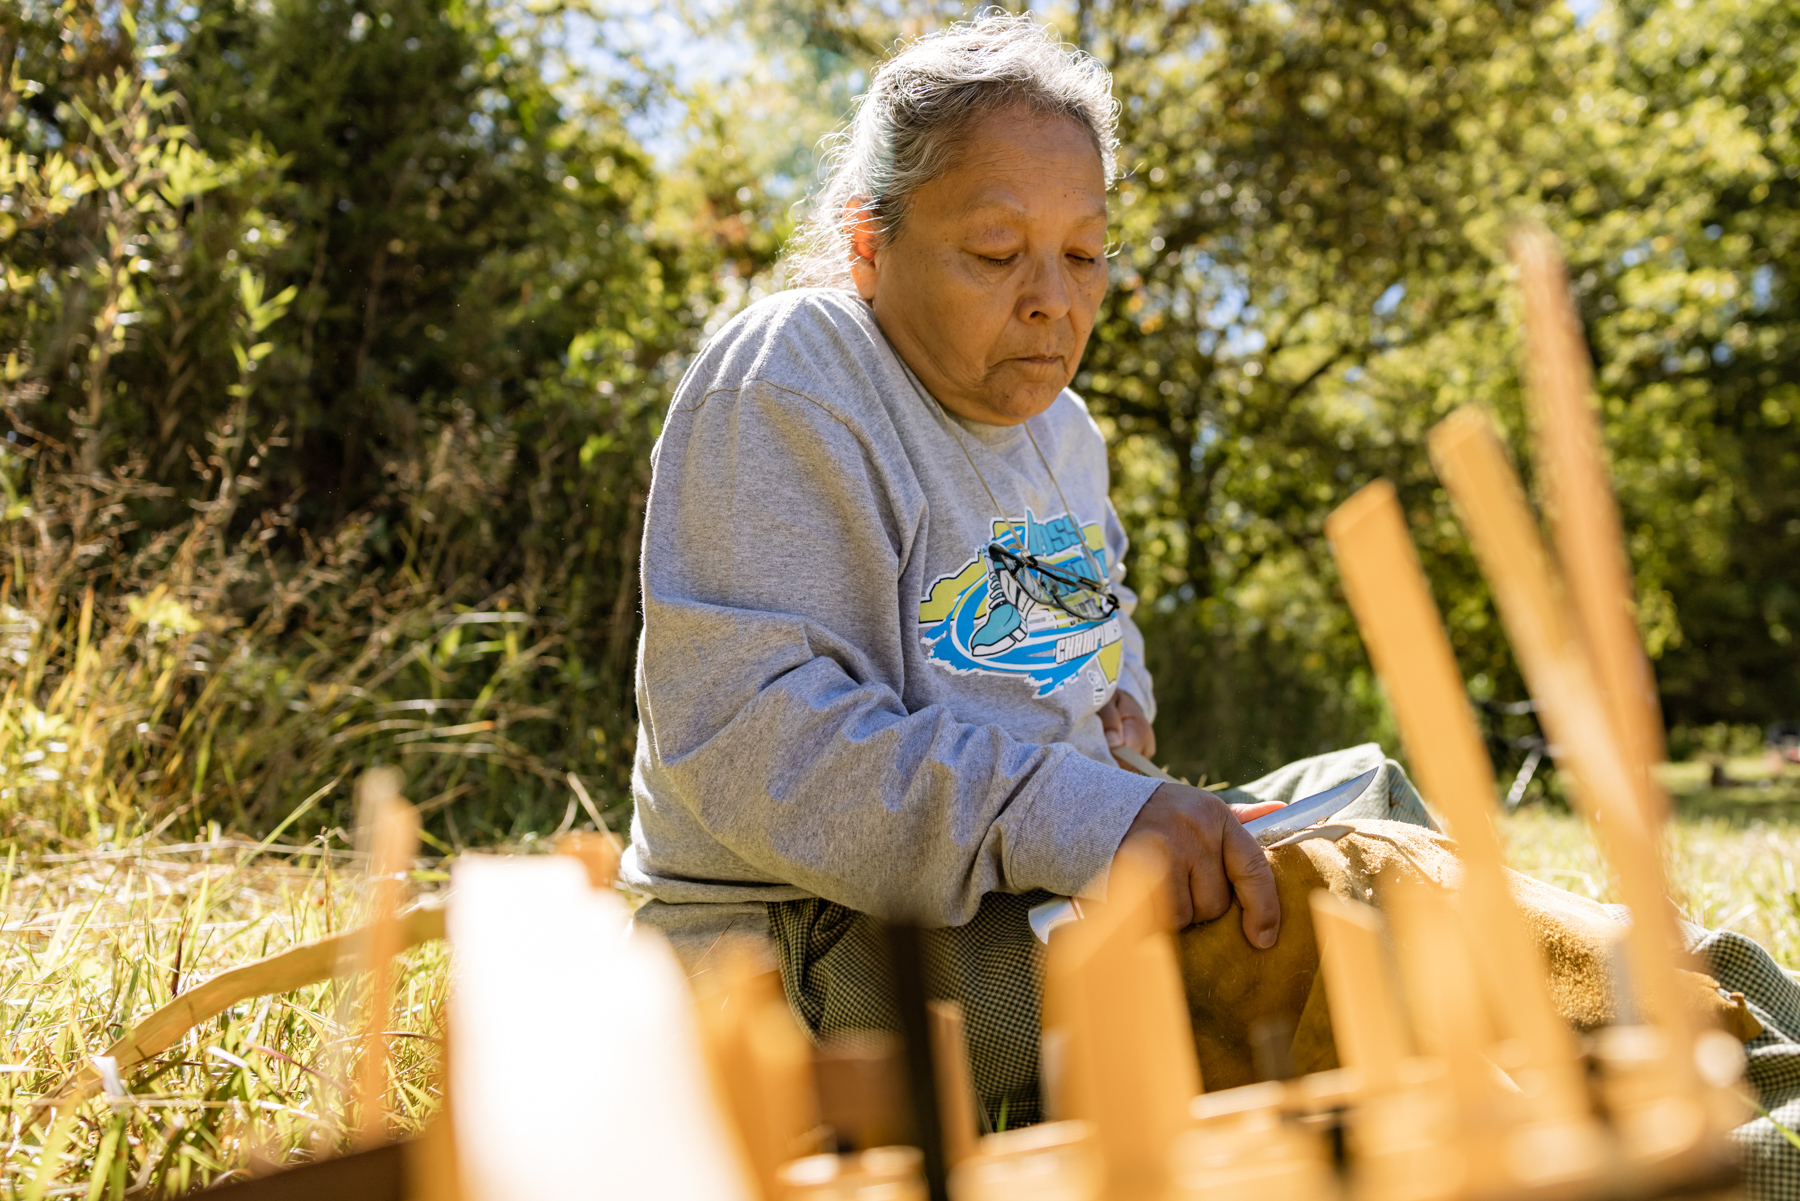 Wa-hni-lv-hi (Time) is relative, it took 100 years to make the Oak tree 1000 strokes to make the splints and 1 week to create a single basket. Betty is making 1 basket that carries traditions to the next generation. 